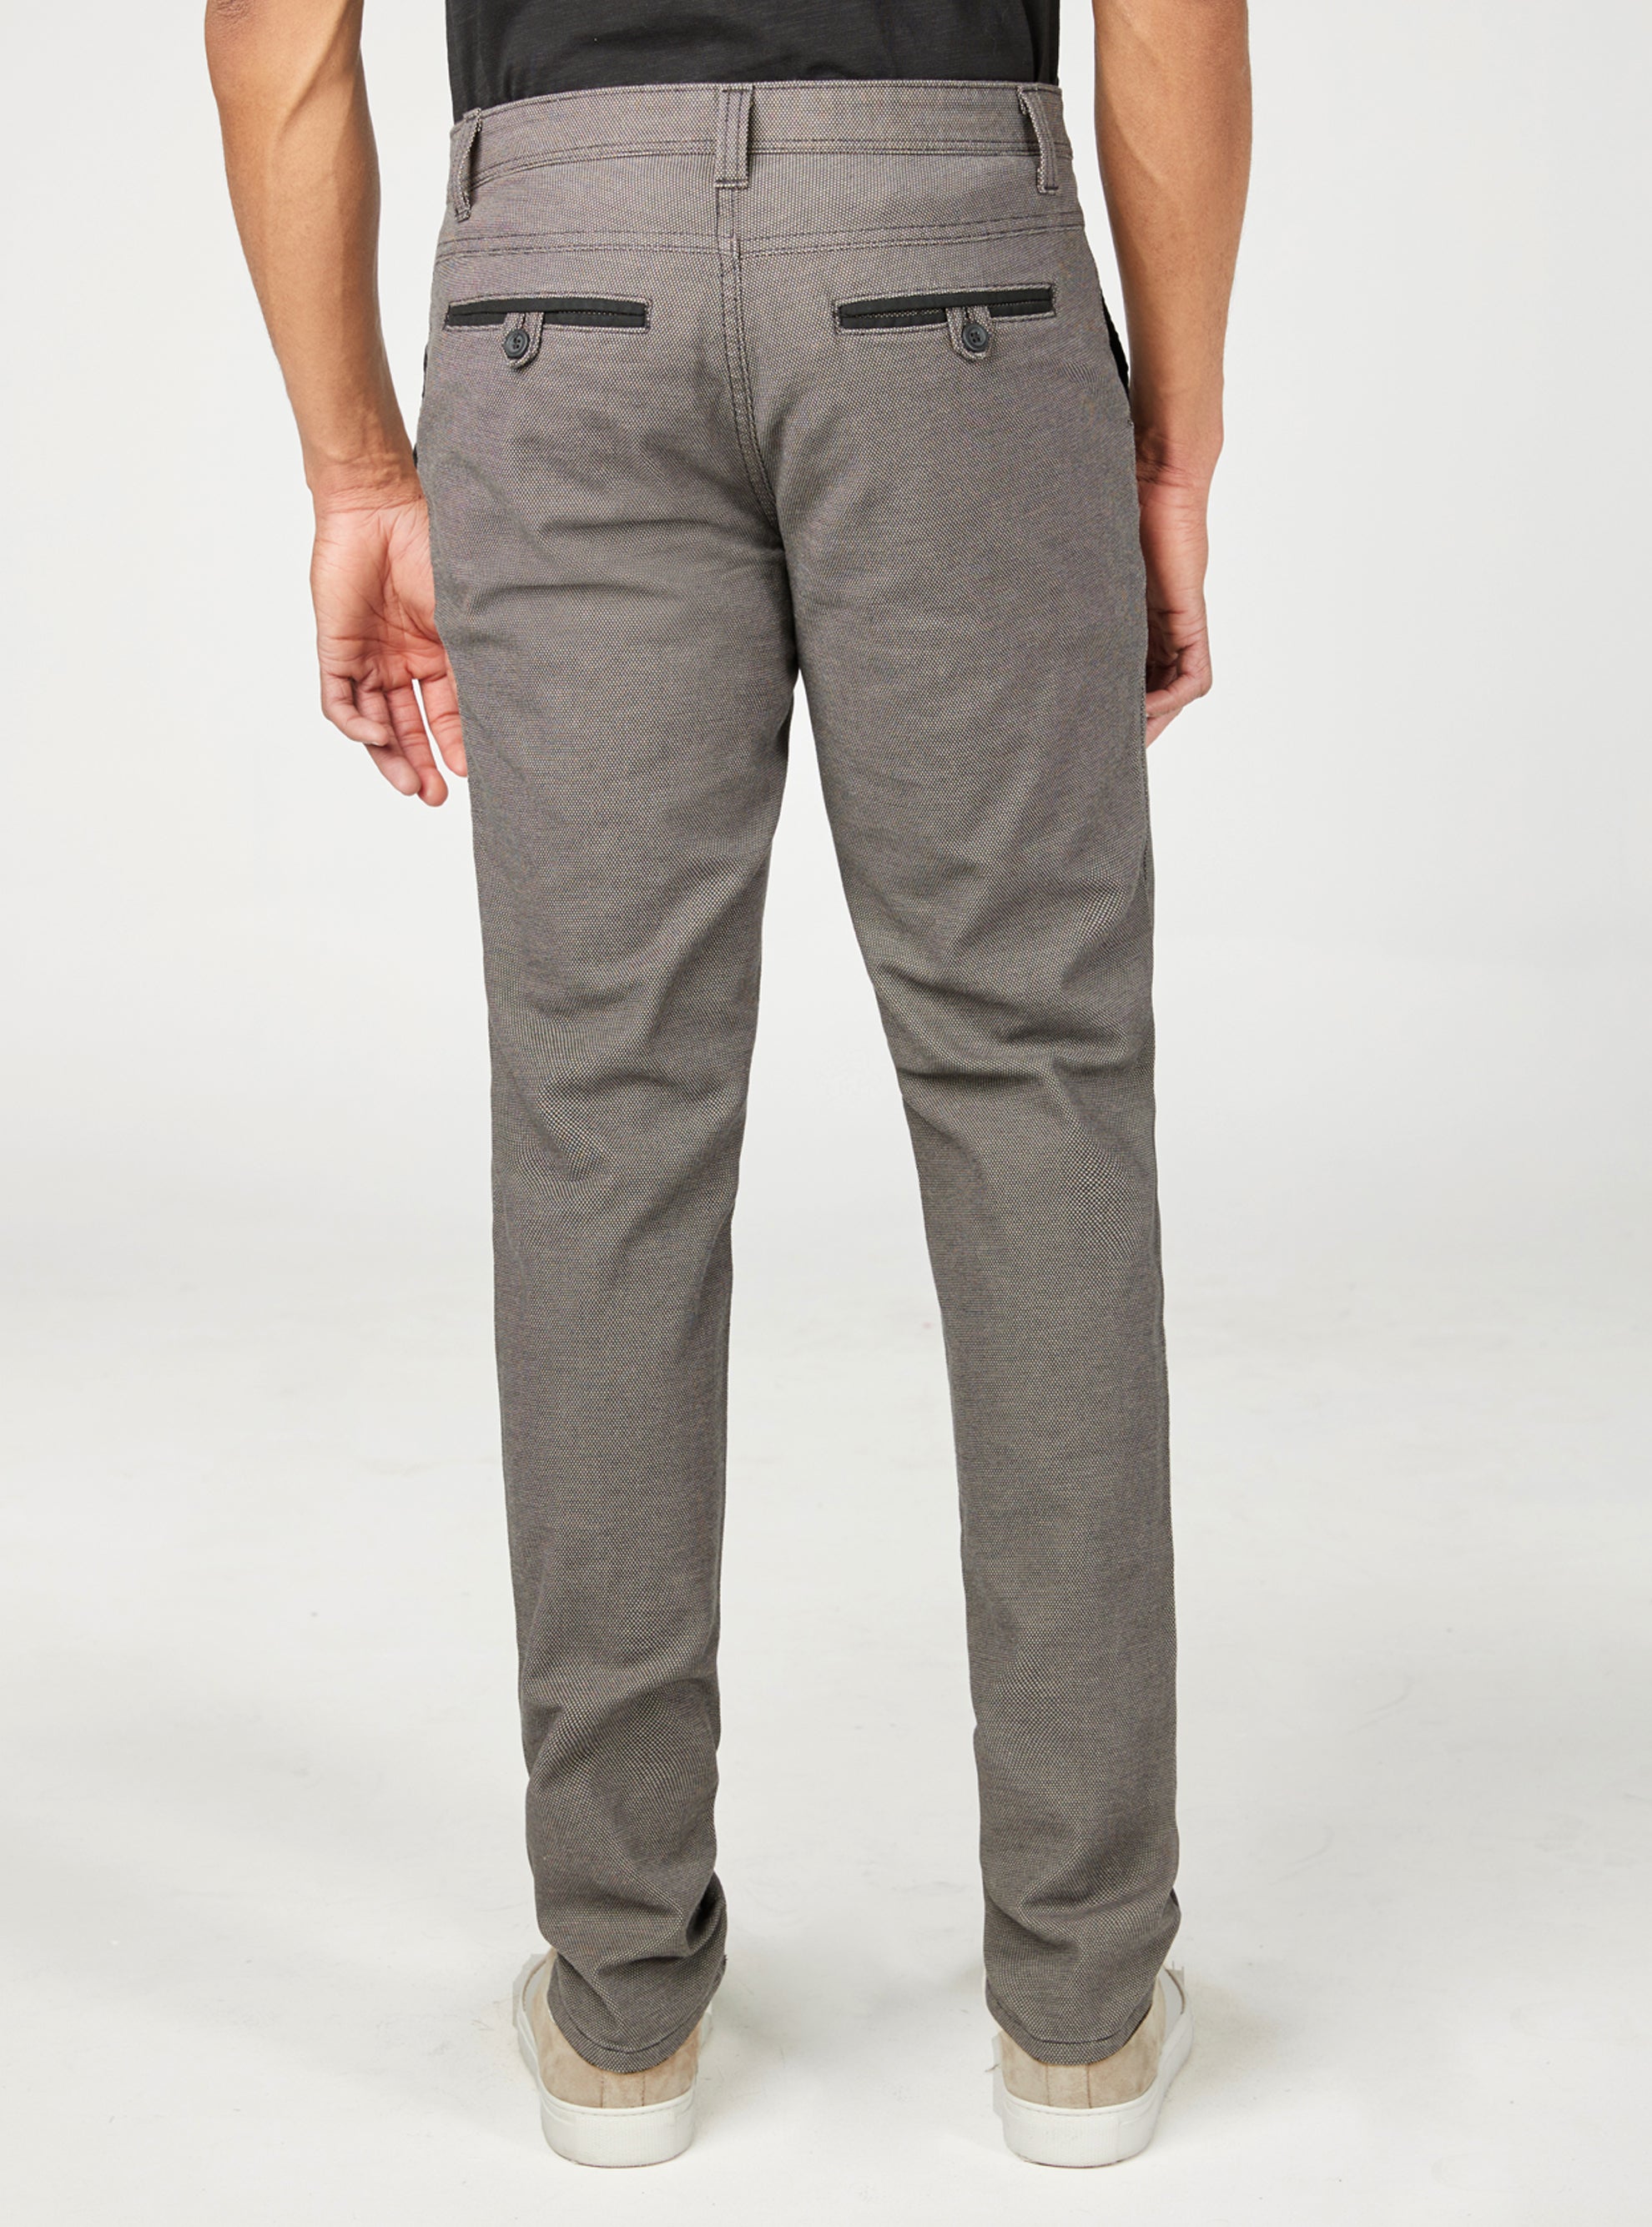 Casual pants with black detail